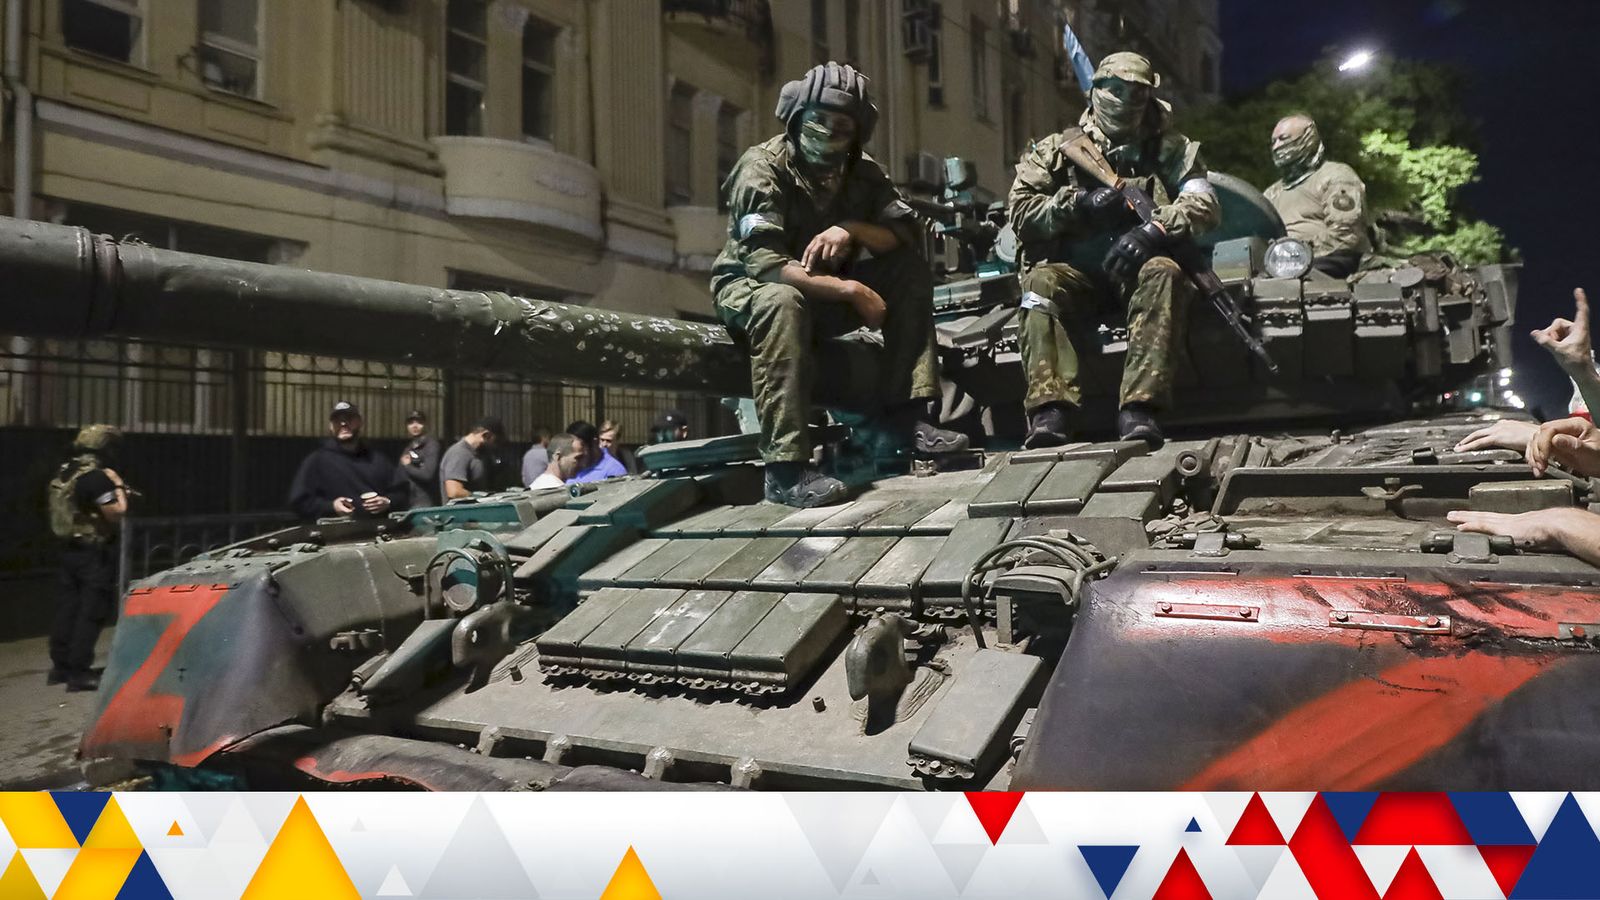 WATCH: Where Russia's military goes after Wagner Group uprising